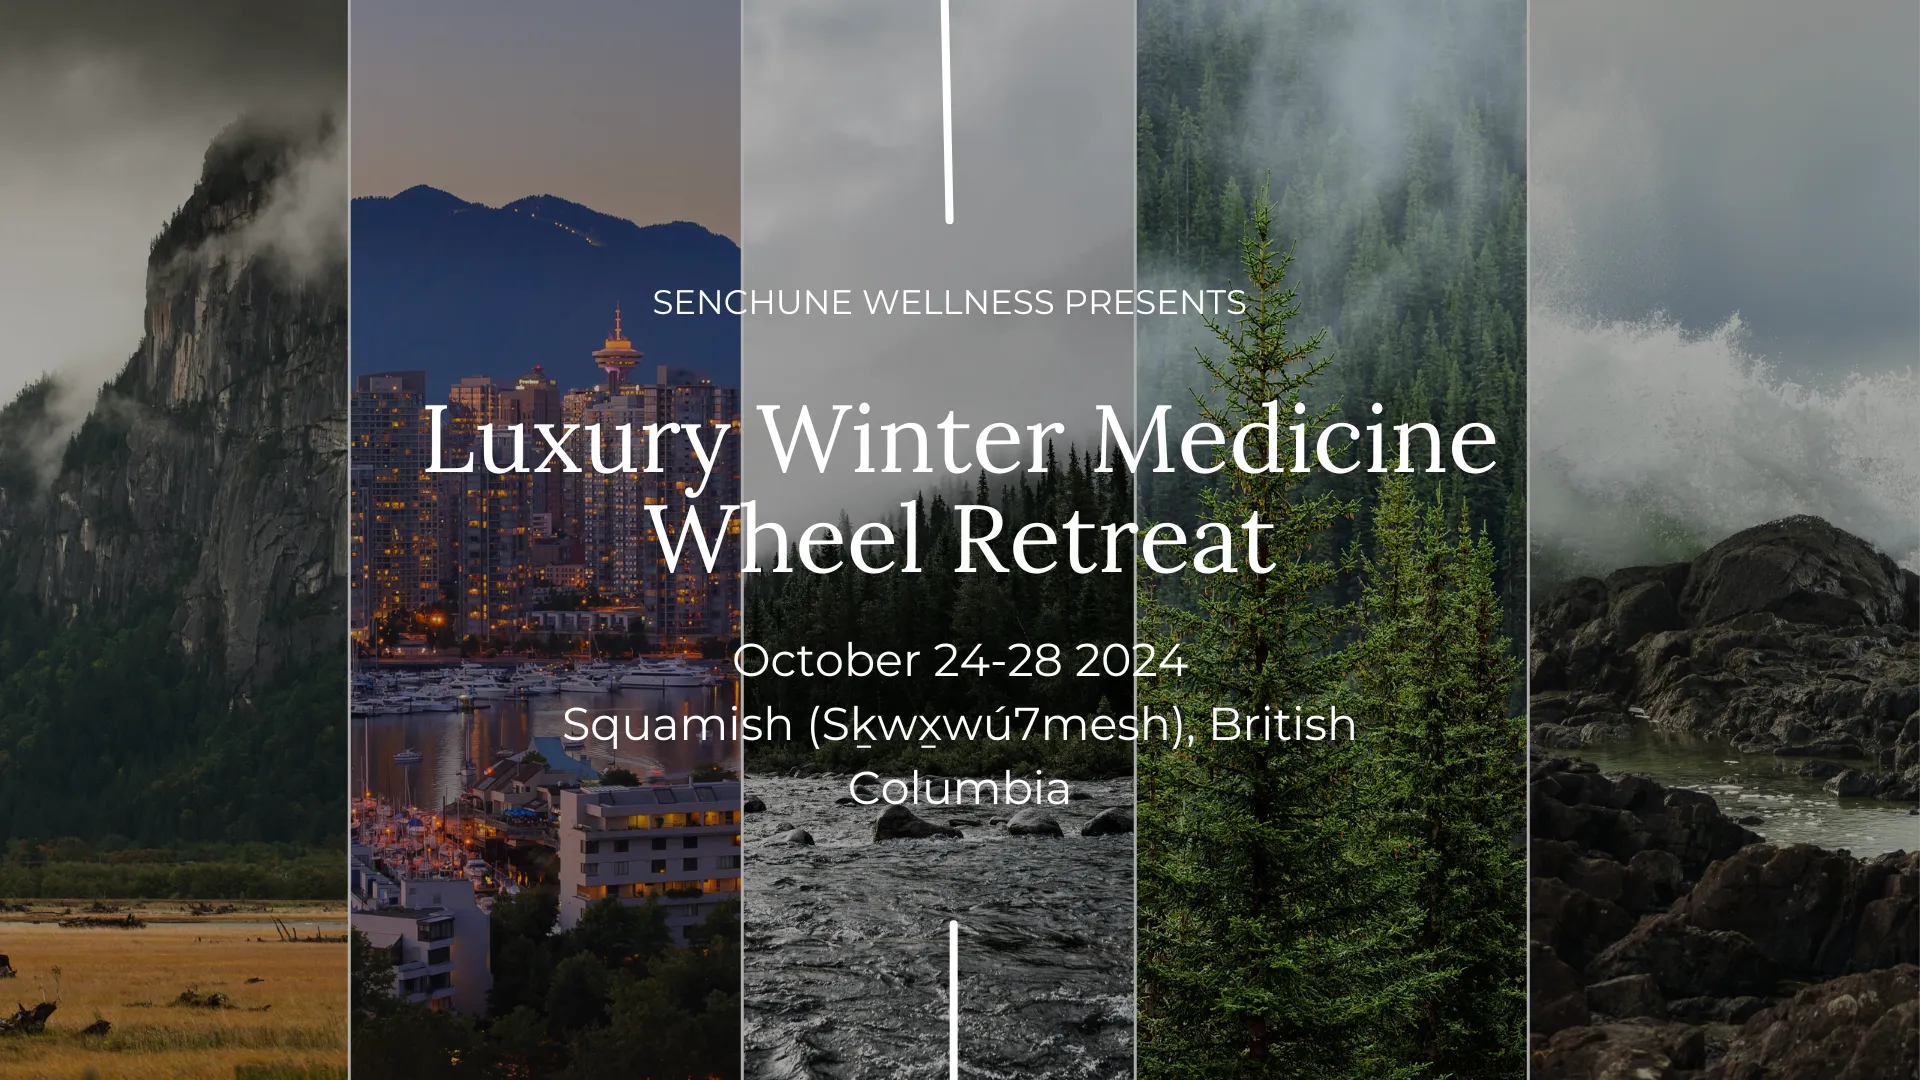 Promotional image for a luxury winter retreat in Squamish, British Columbia, featuring nature and city scenes with event details.